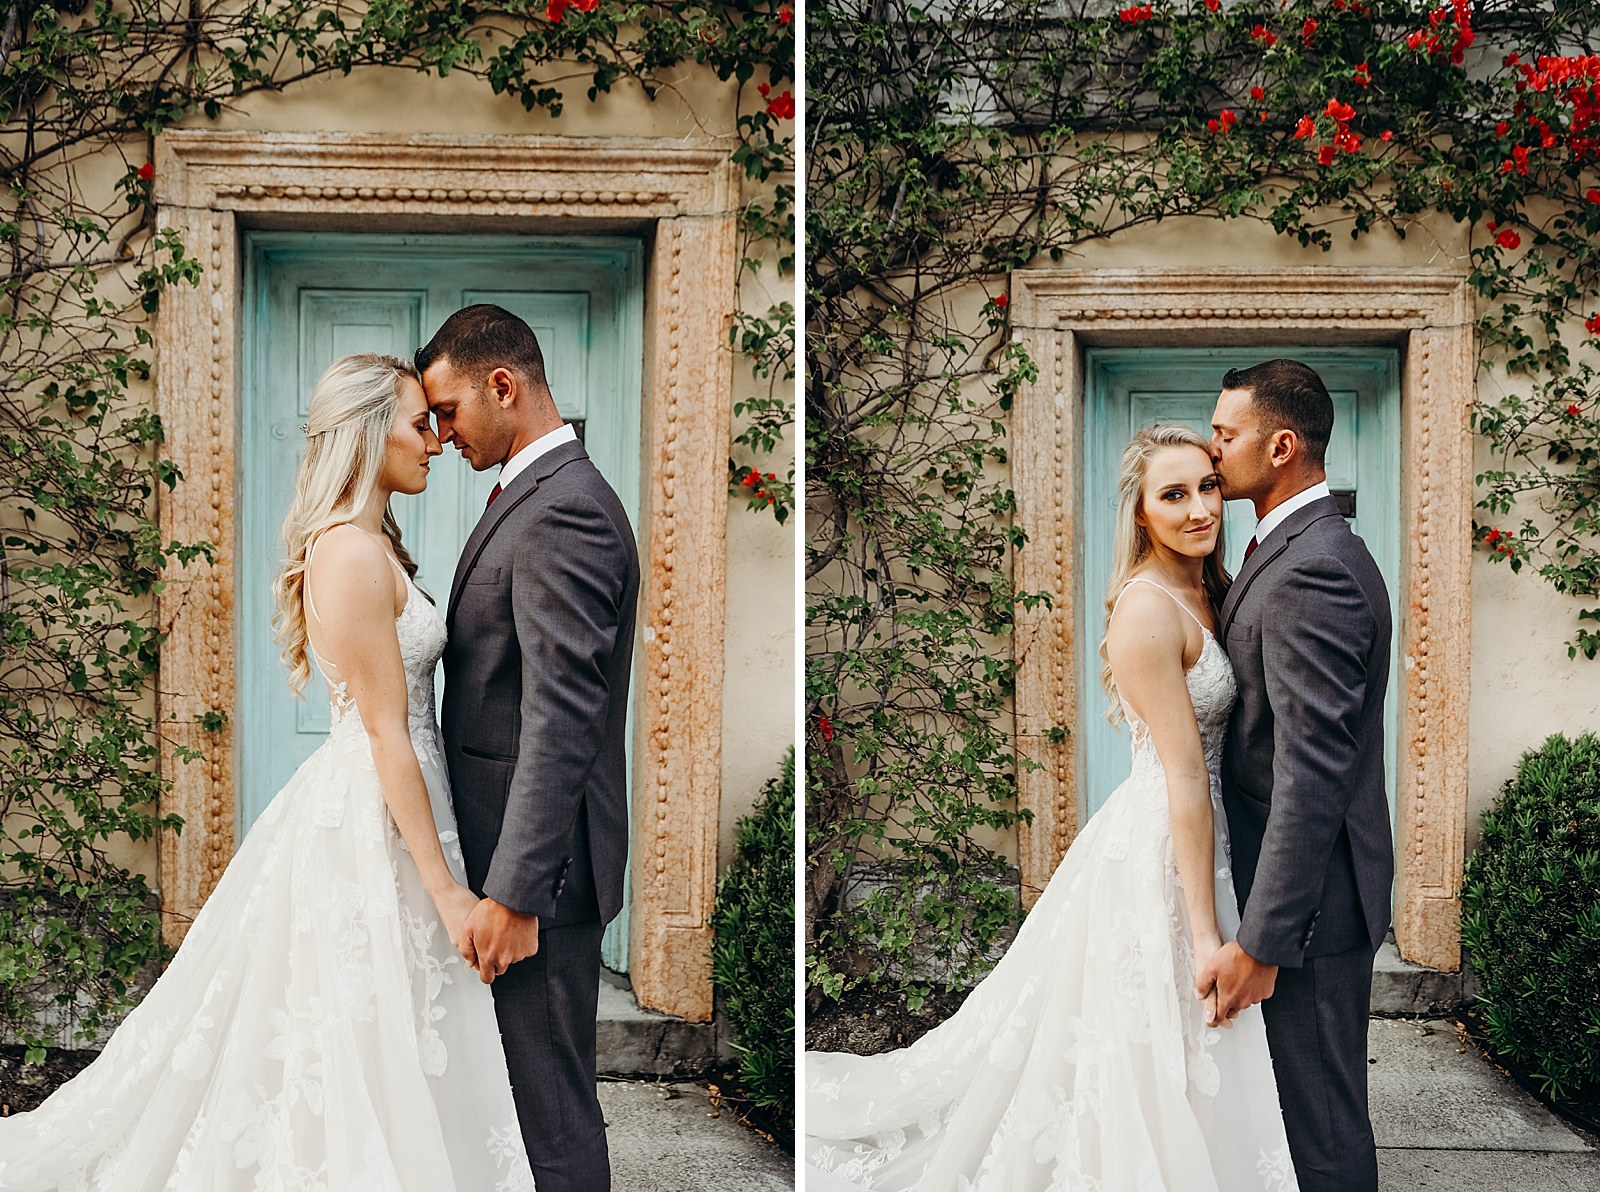 Man kisses woman on side of head in front of house Worth Avenue Bridal Photography captured by South Florida Engagement Photographer Maggie Alvarez Photography